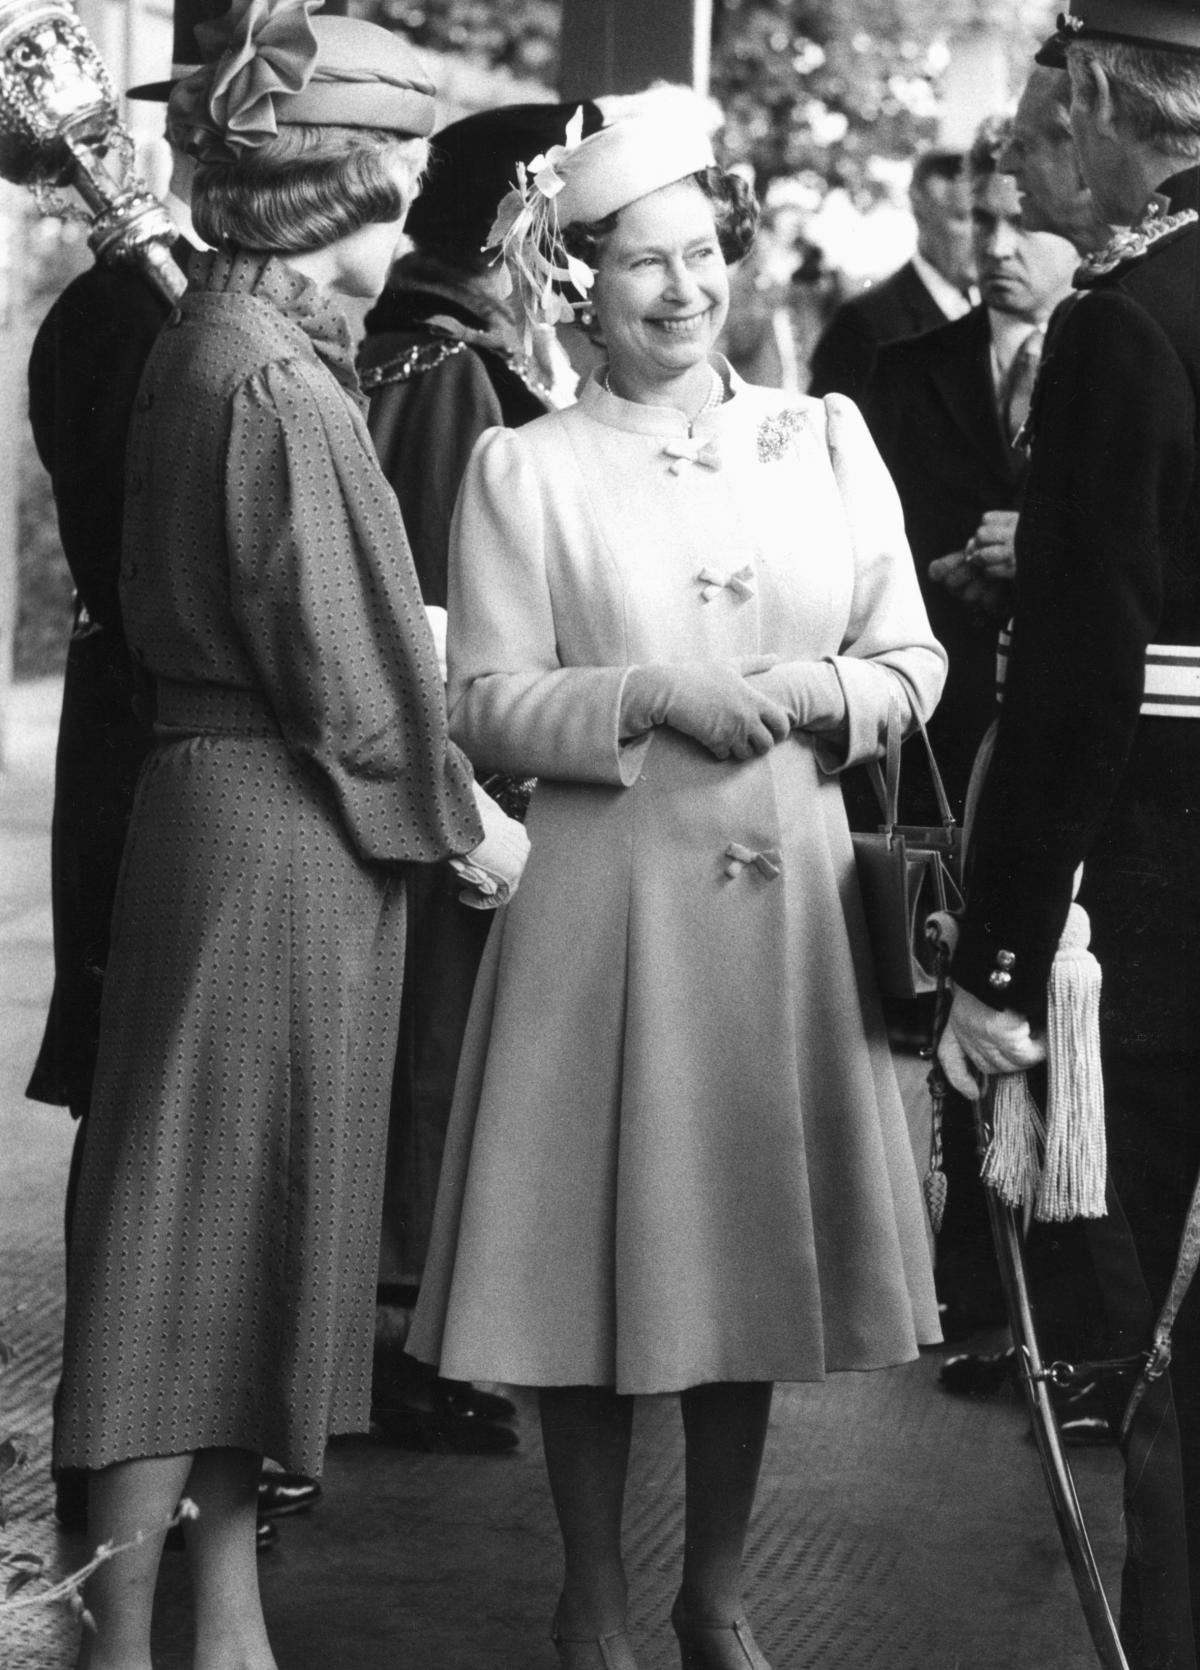 The Queen with guests at the Rhodes House garden party during her visit to Oxford on June 28, 1983.